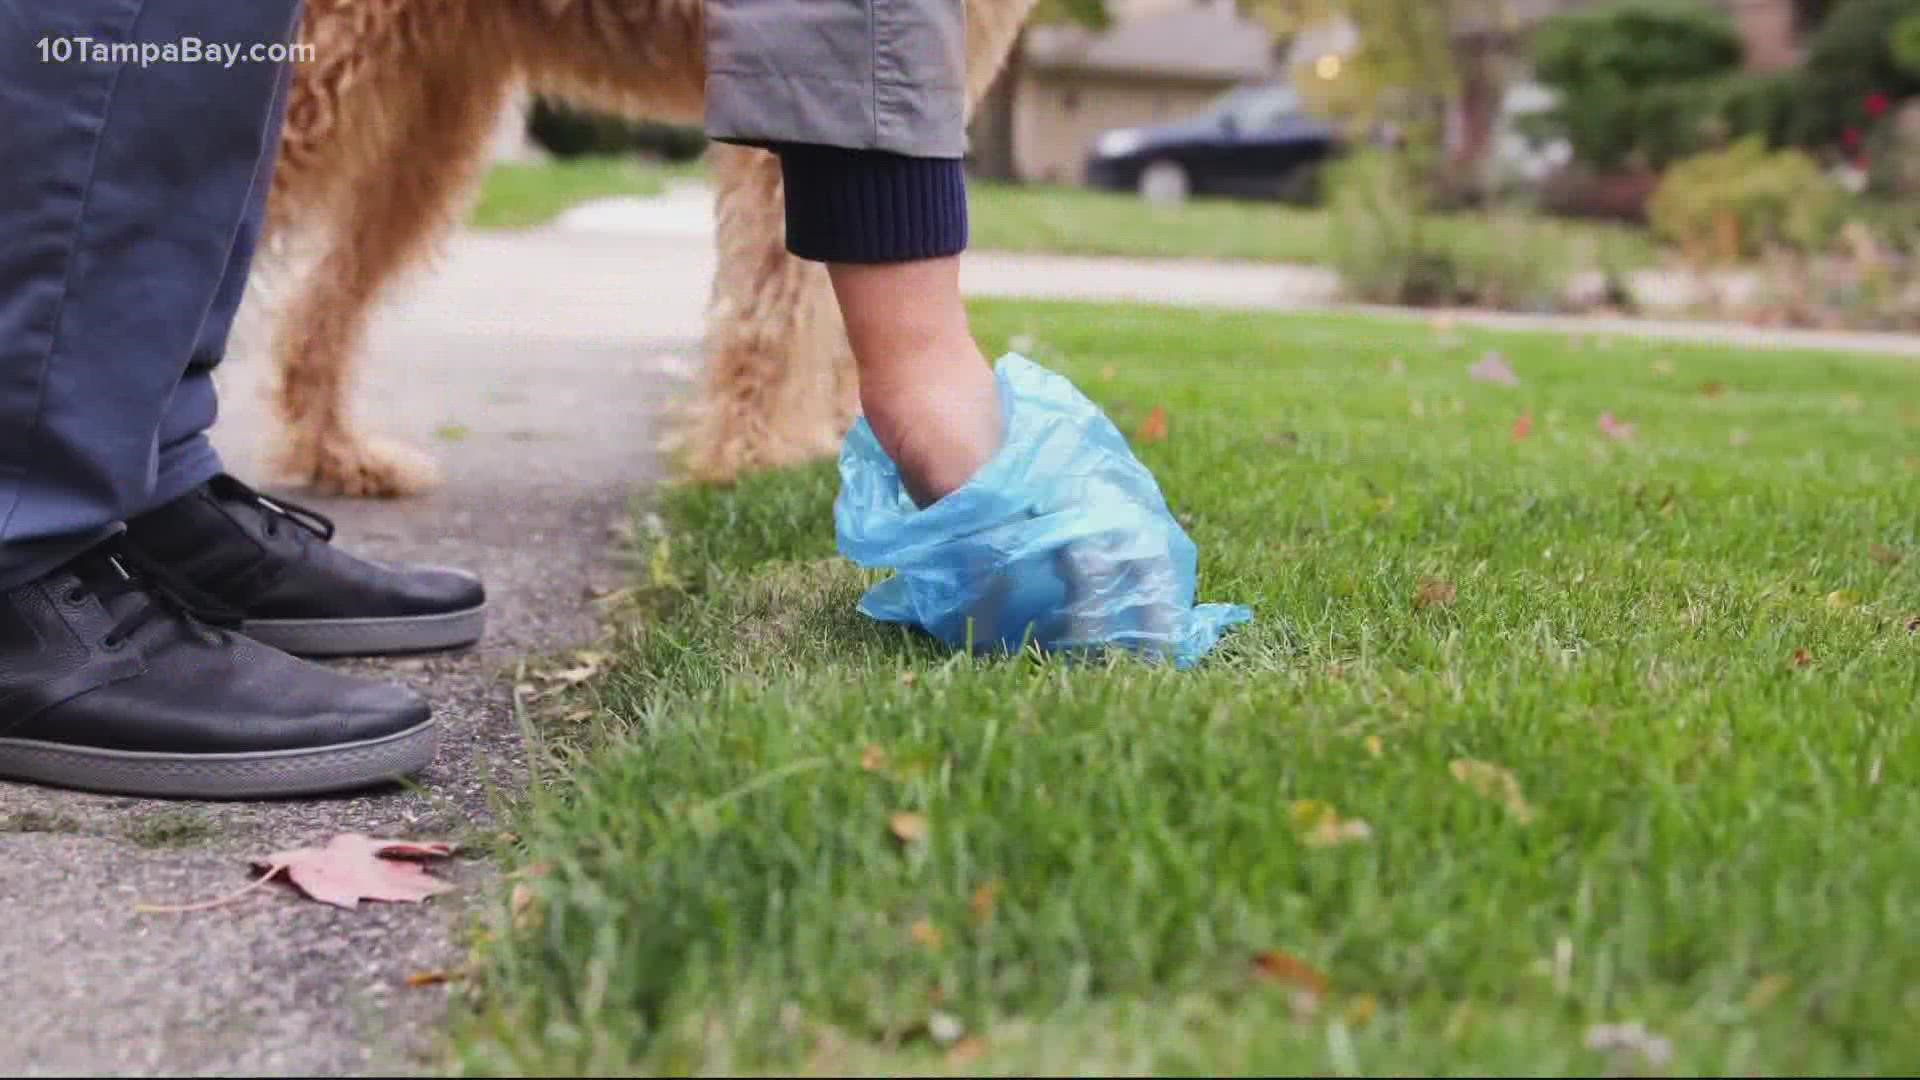 It's responsible to pick up your dog's waste, but you may not be disposing of it properly.